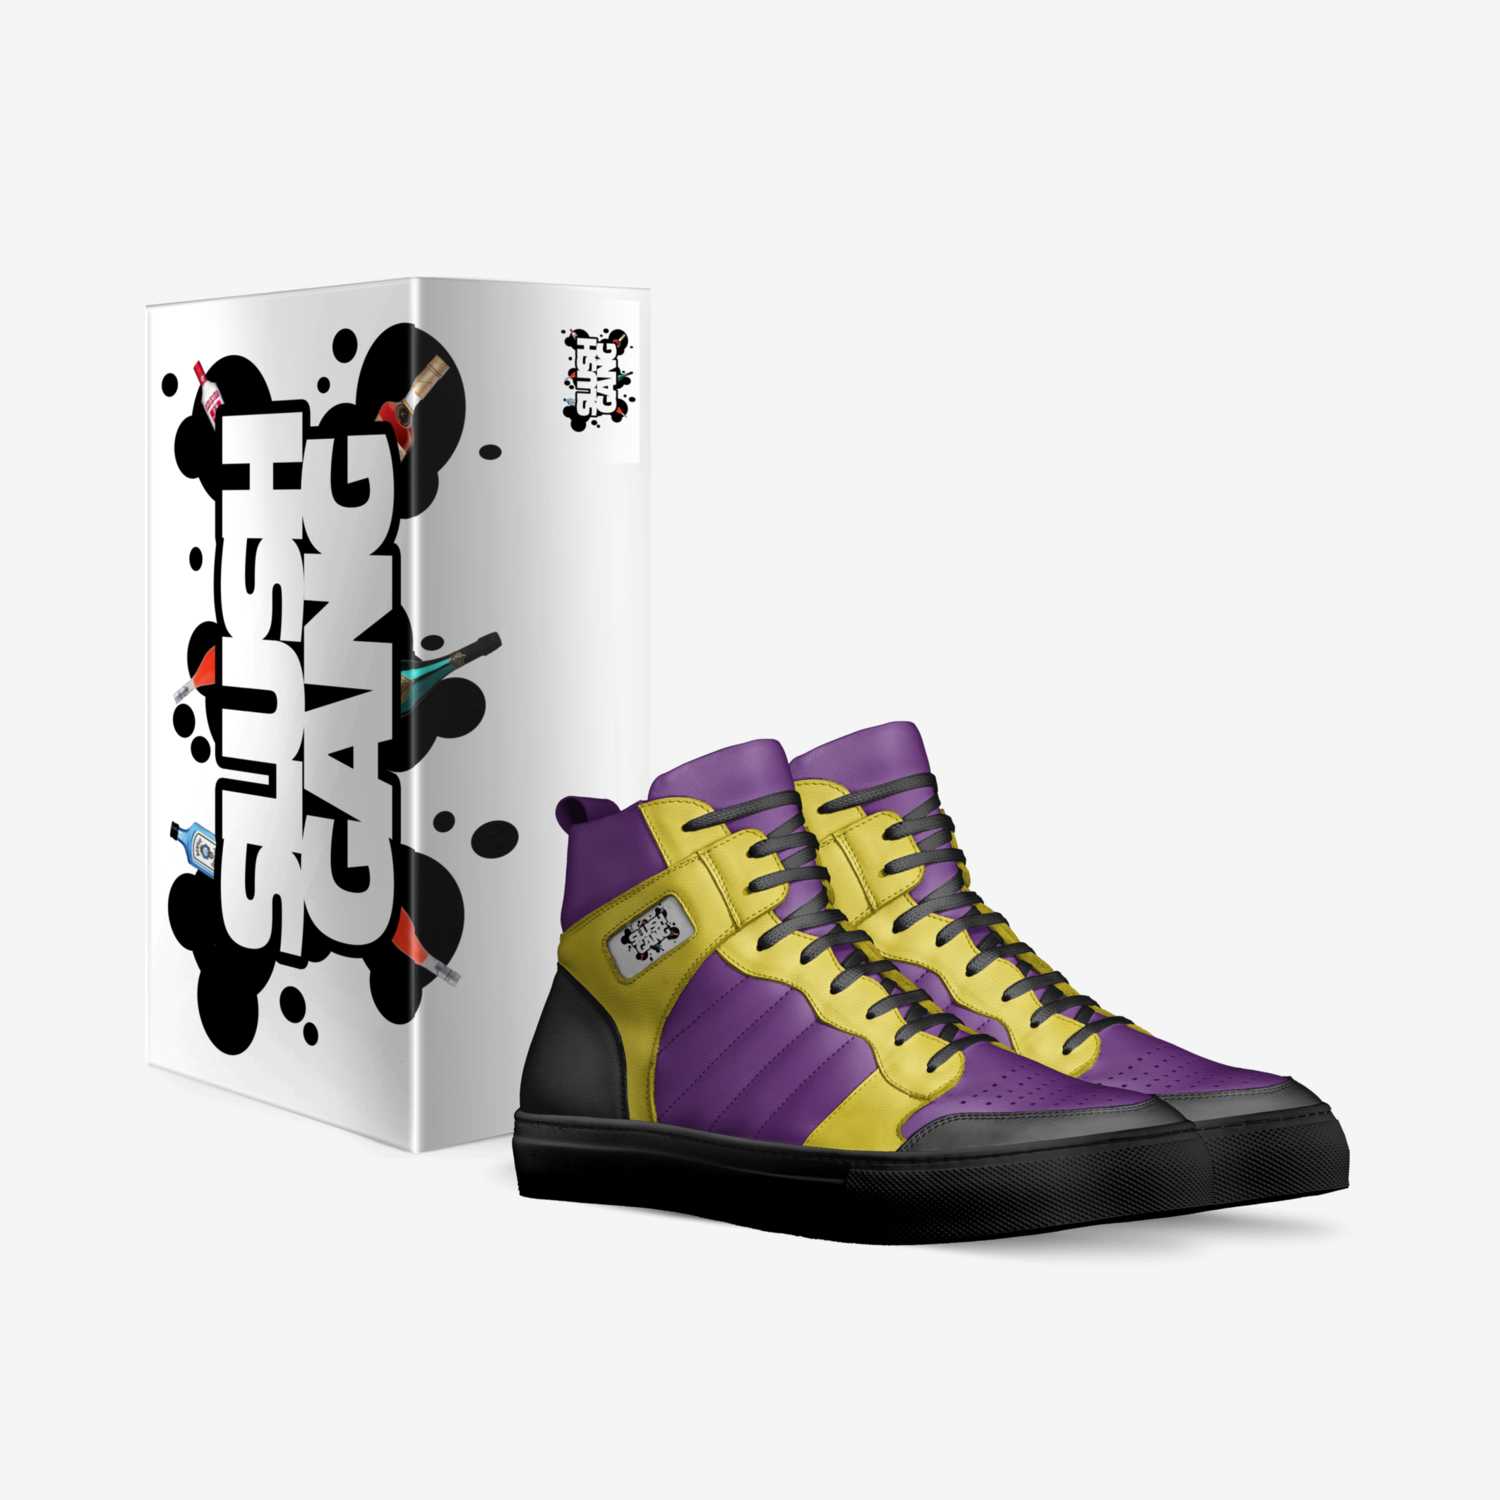 Soldier drip custom made in Italy shoes by Will Maticz | Box view